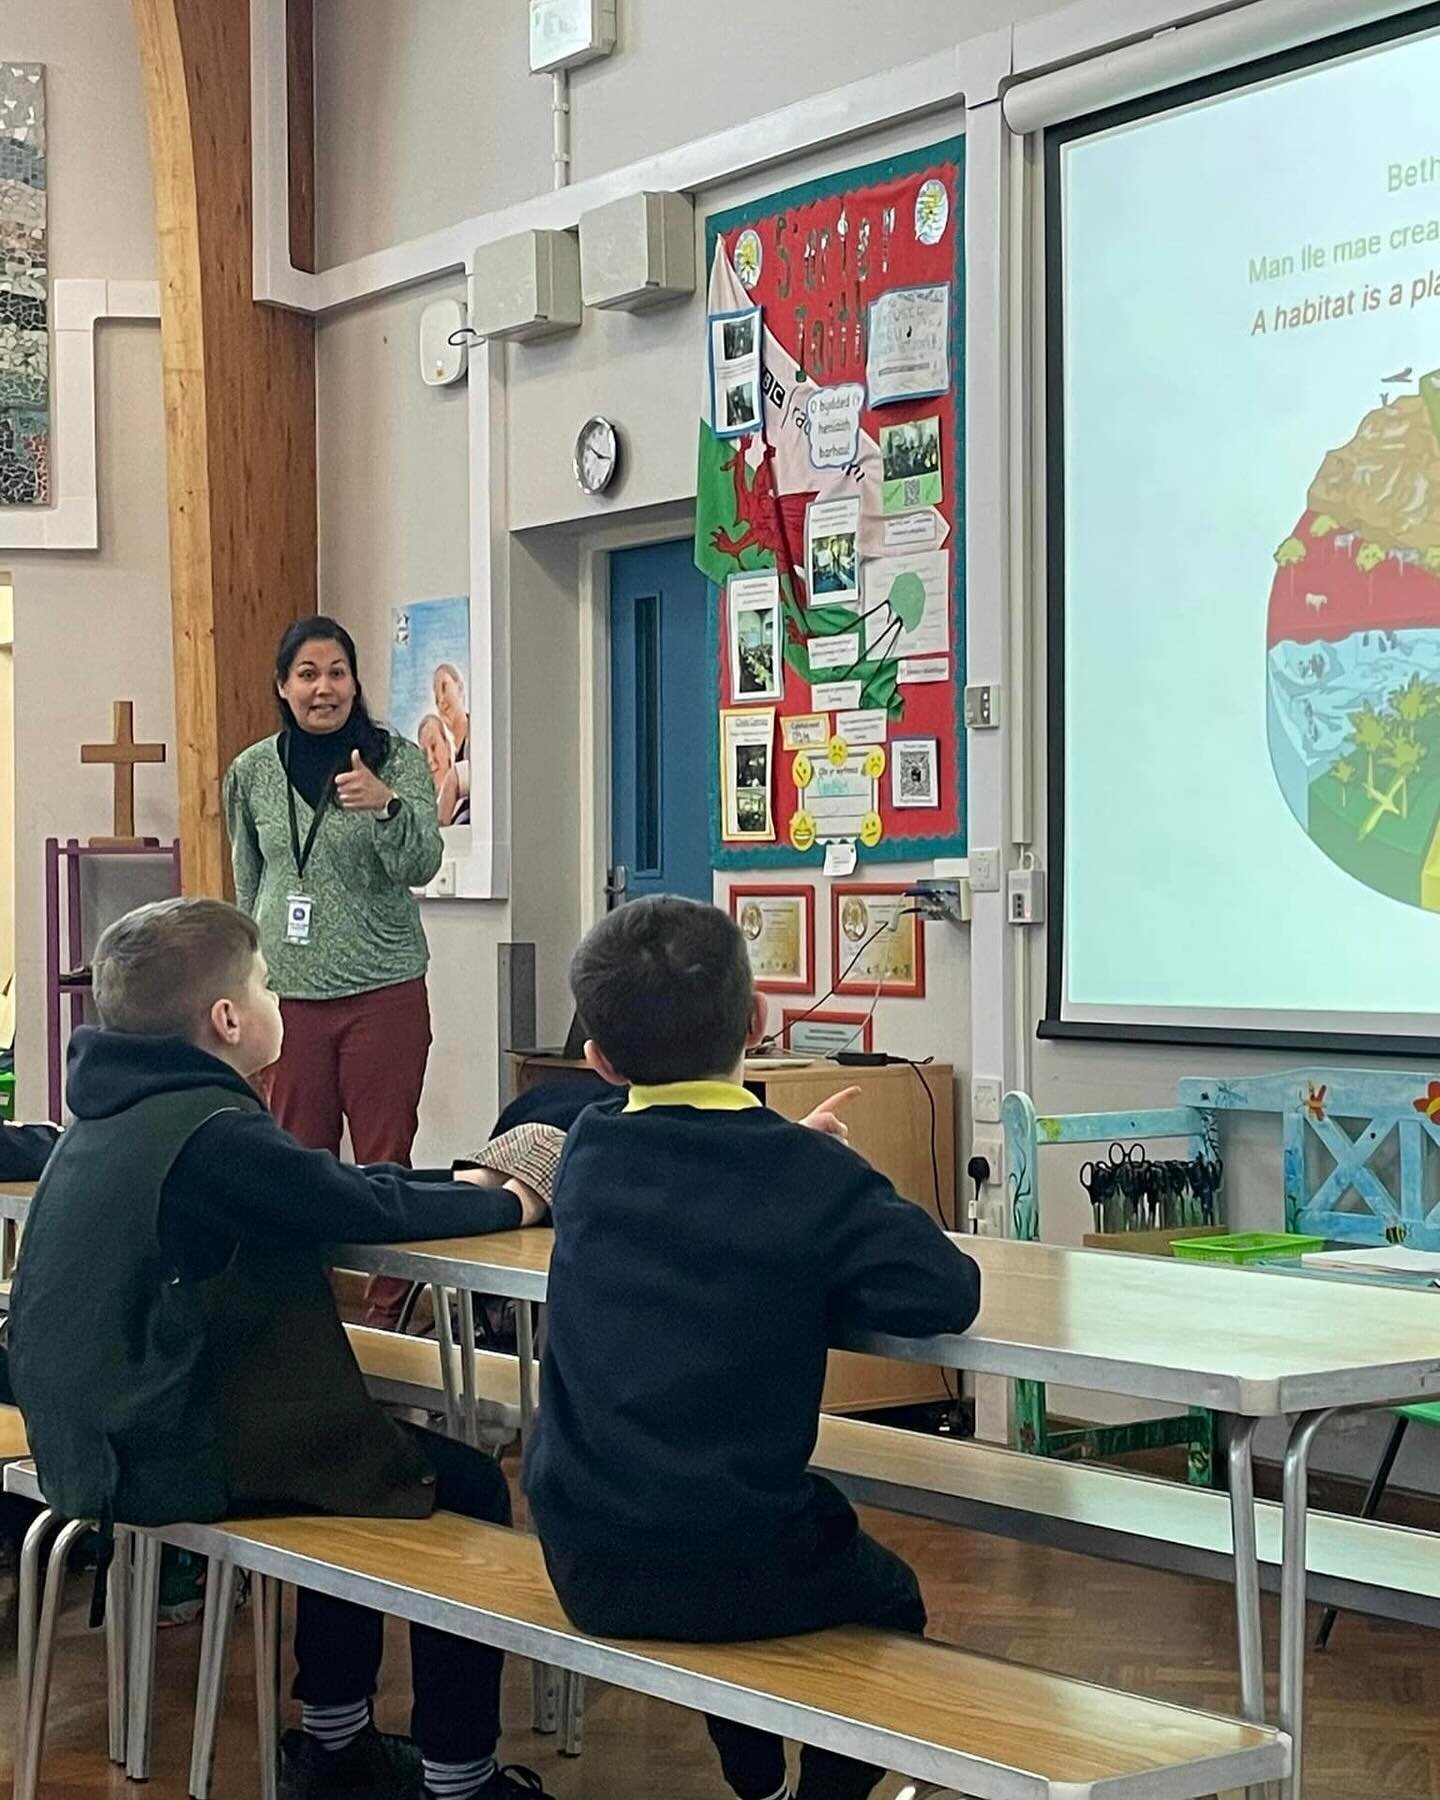 To coincide with Green Careers Week Kate has been talking to students at Campws Cymunedol Bontnewydd about nature and habitats. The children had some great ideas about how to bring nature into their new building. #plantpower #school #natureled #LandS